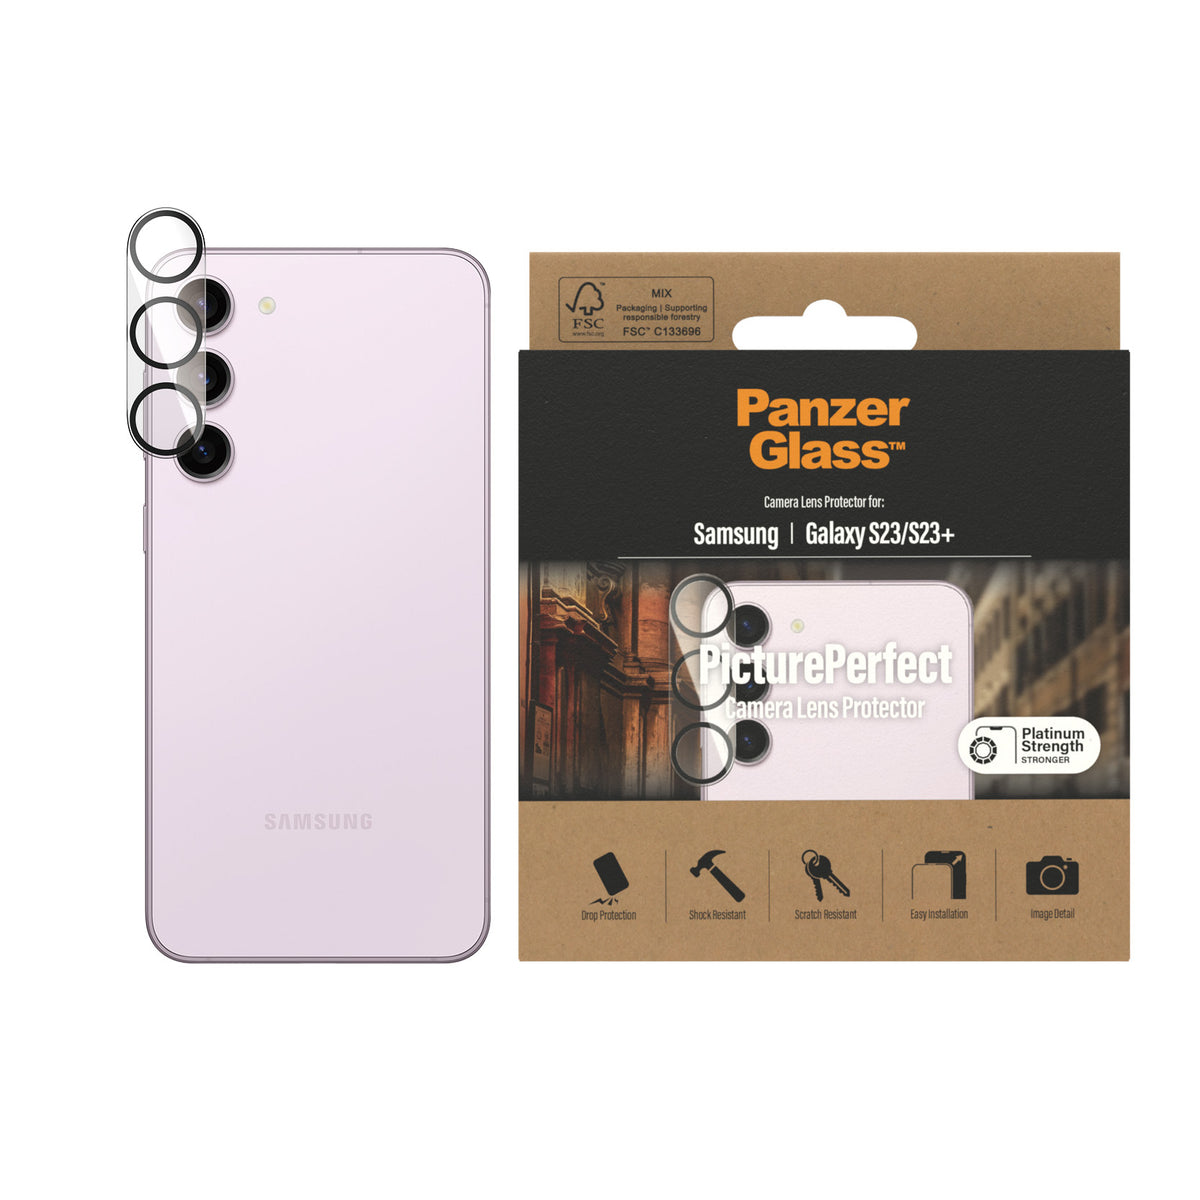 PANZERGLASS Camera Lens Protector for Samsung Galaxy S23/S23 Plus - Clear